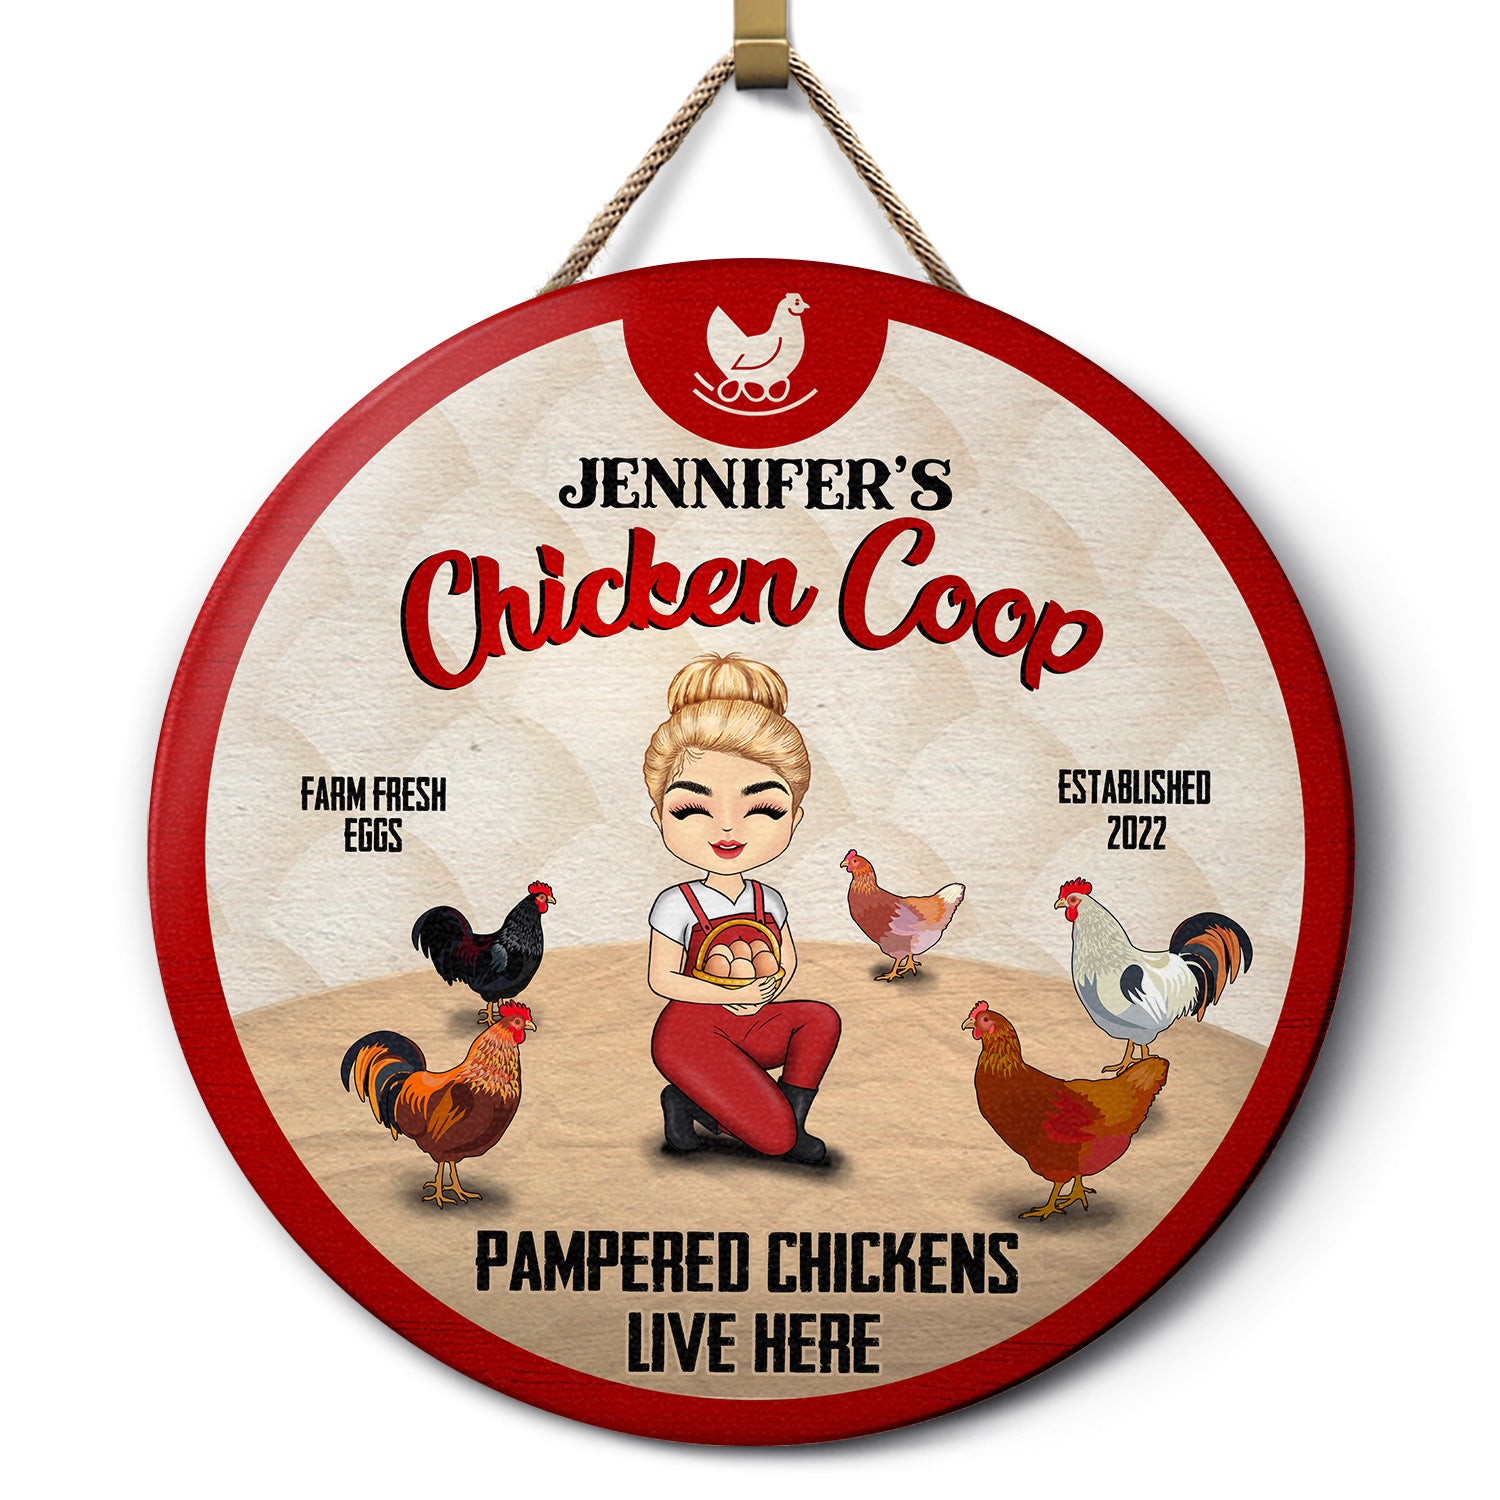 Pampered Chickens Live Here - Chicken Coop Decoration - Personalized Custom Wood Circle Sign